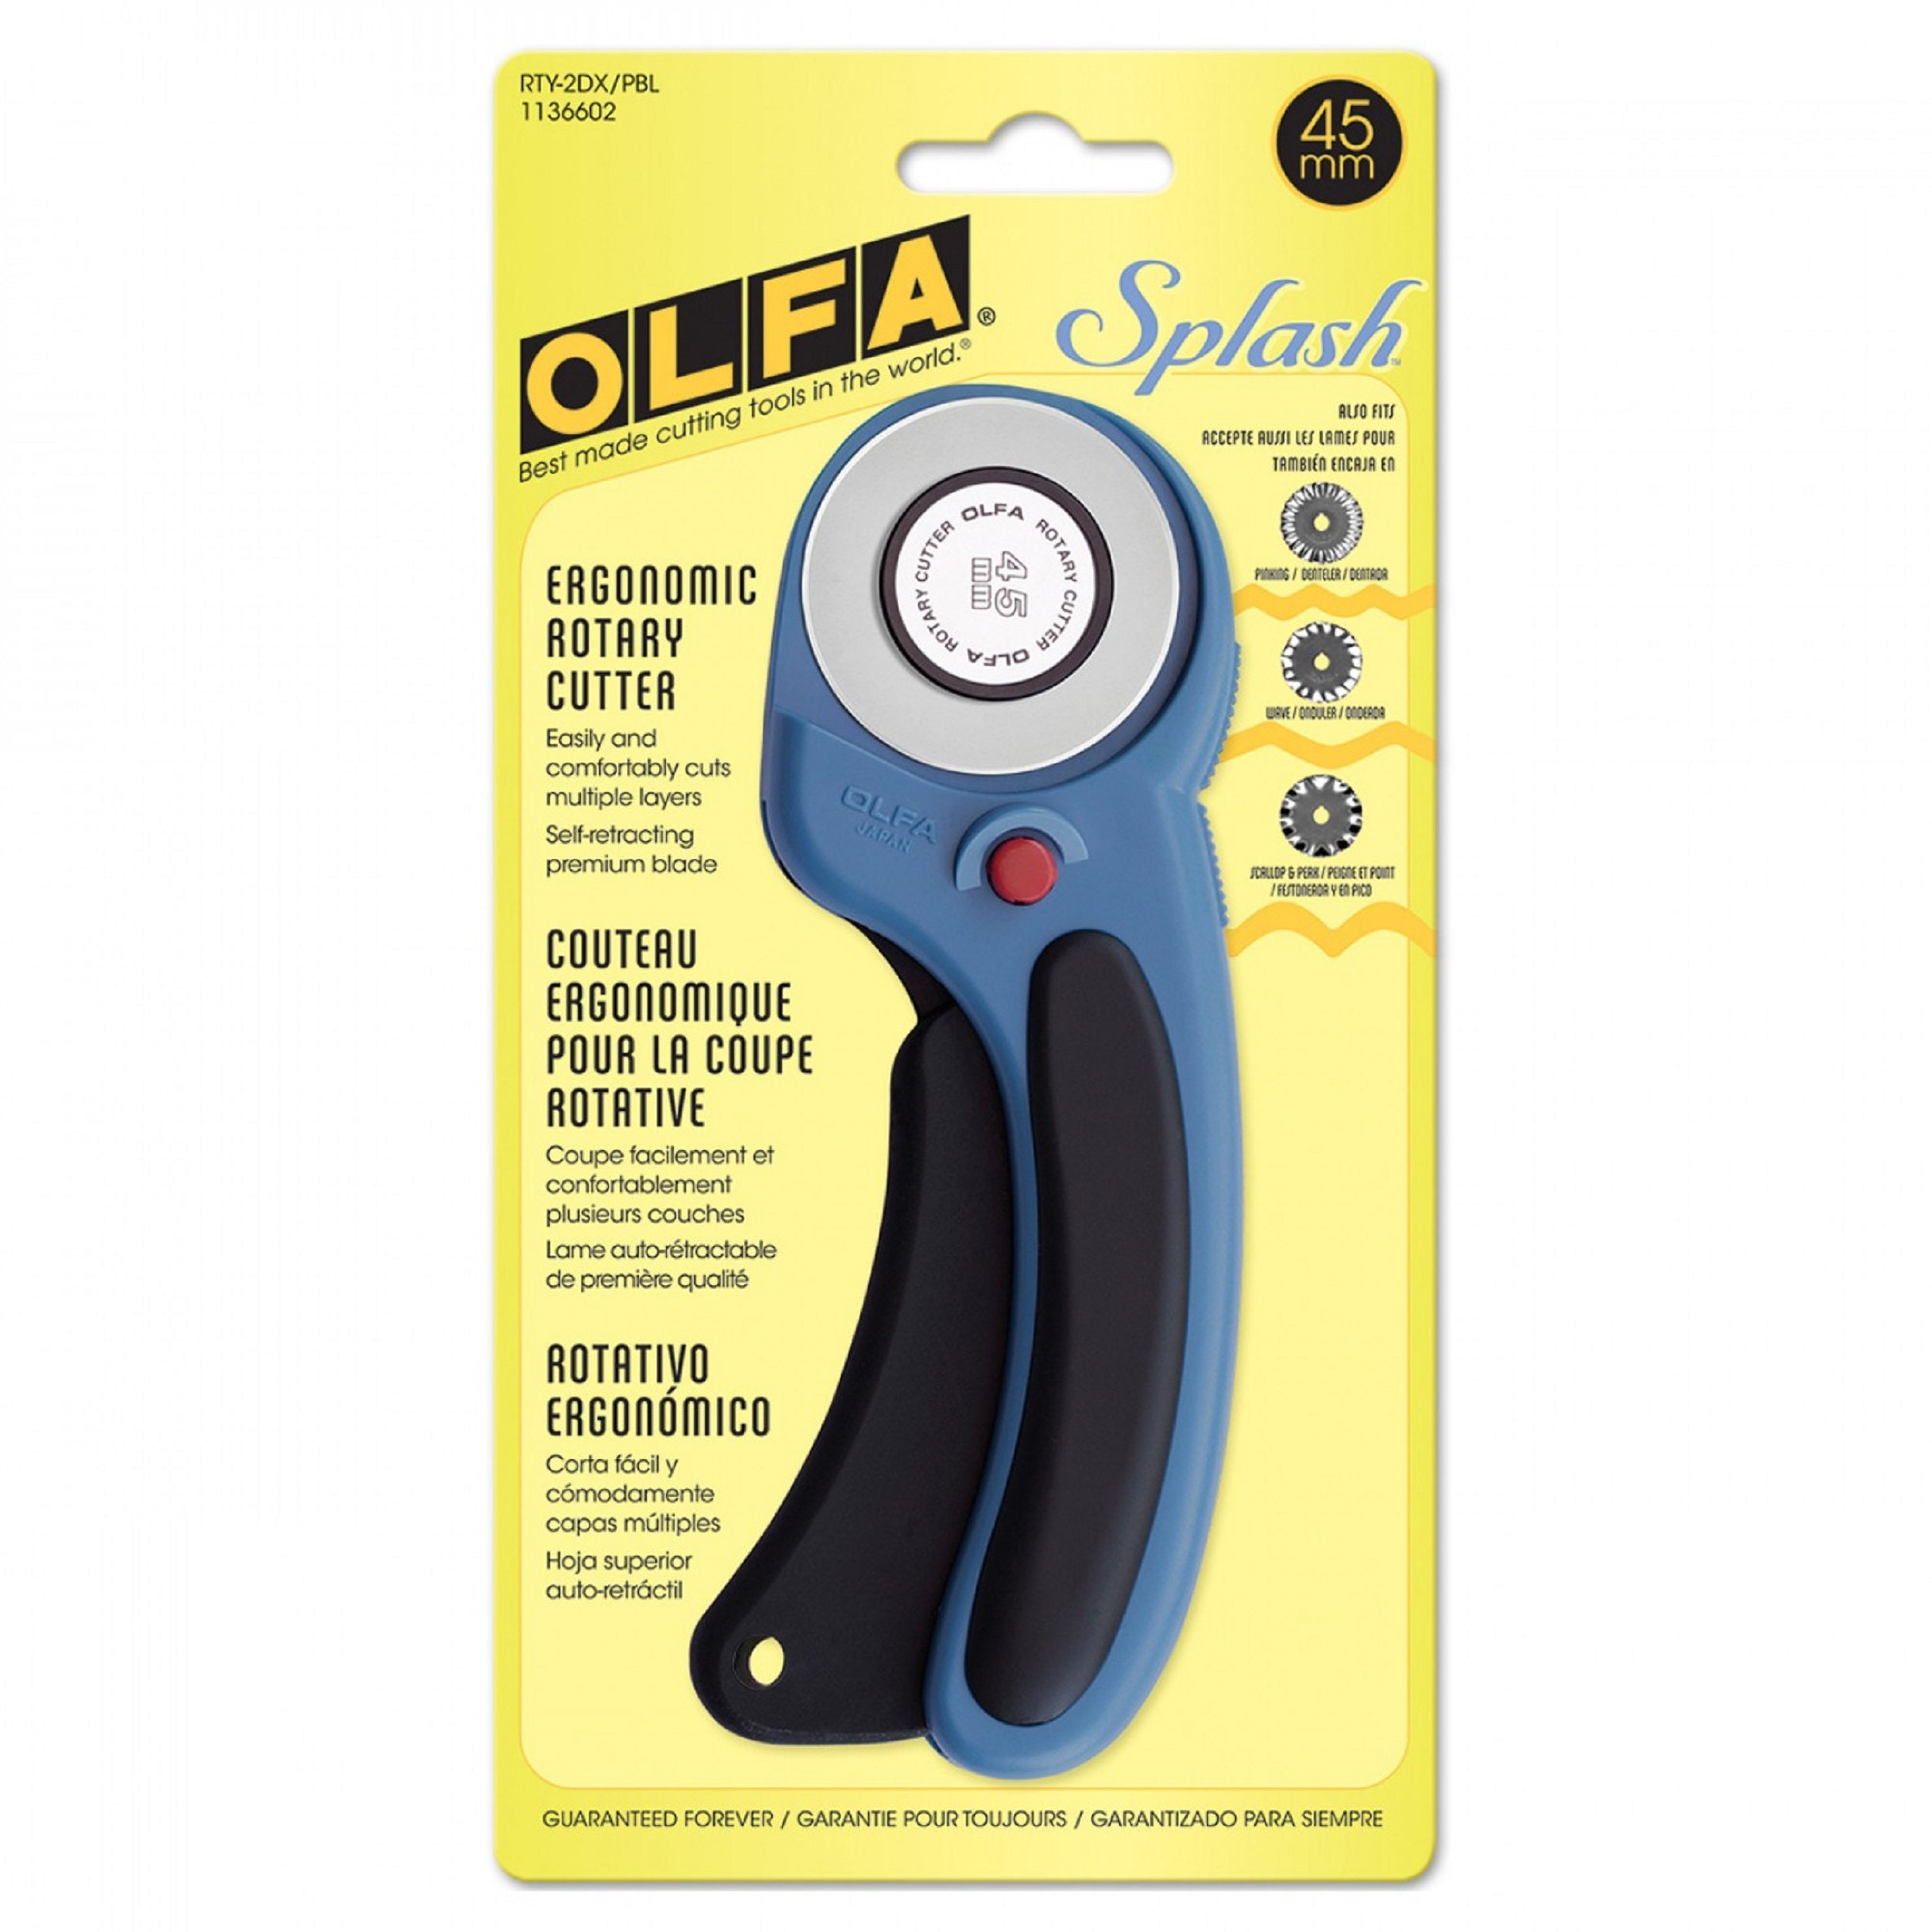 OLFA Delux 45mm Rotary Blade Cutter Trimmer Magenta